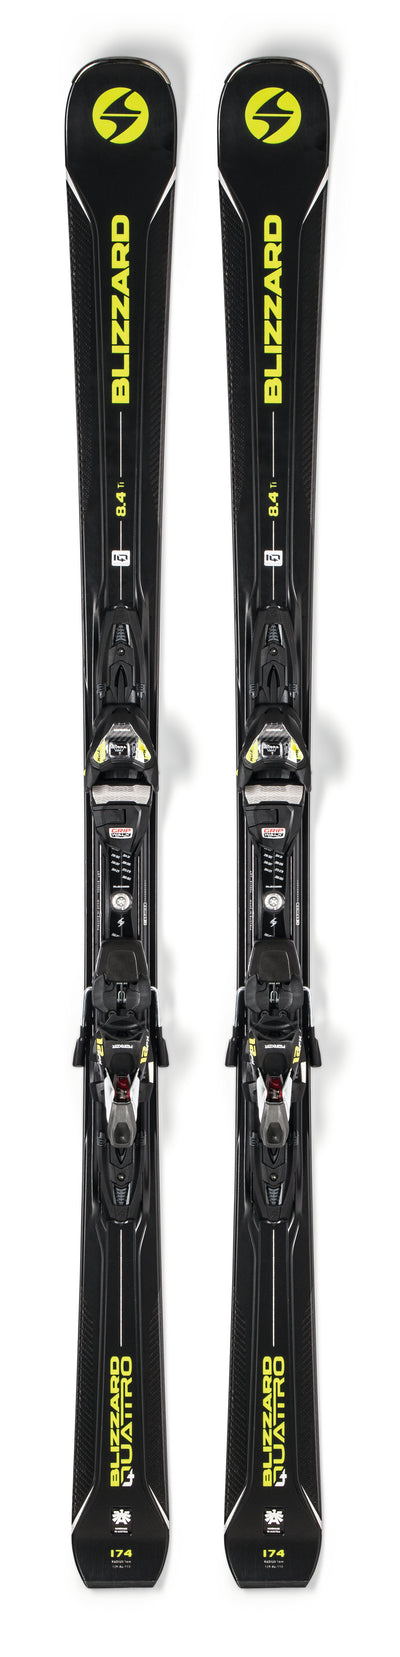 2019 Blizzard Quattro 8.4 Ti snow skis with bindings (CLEARANCE) - ProSkiGuy your Hometown Ski Shop on the web